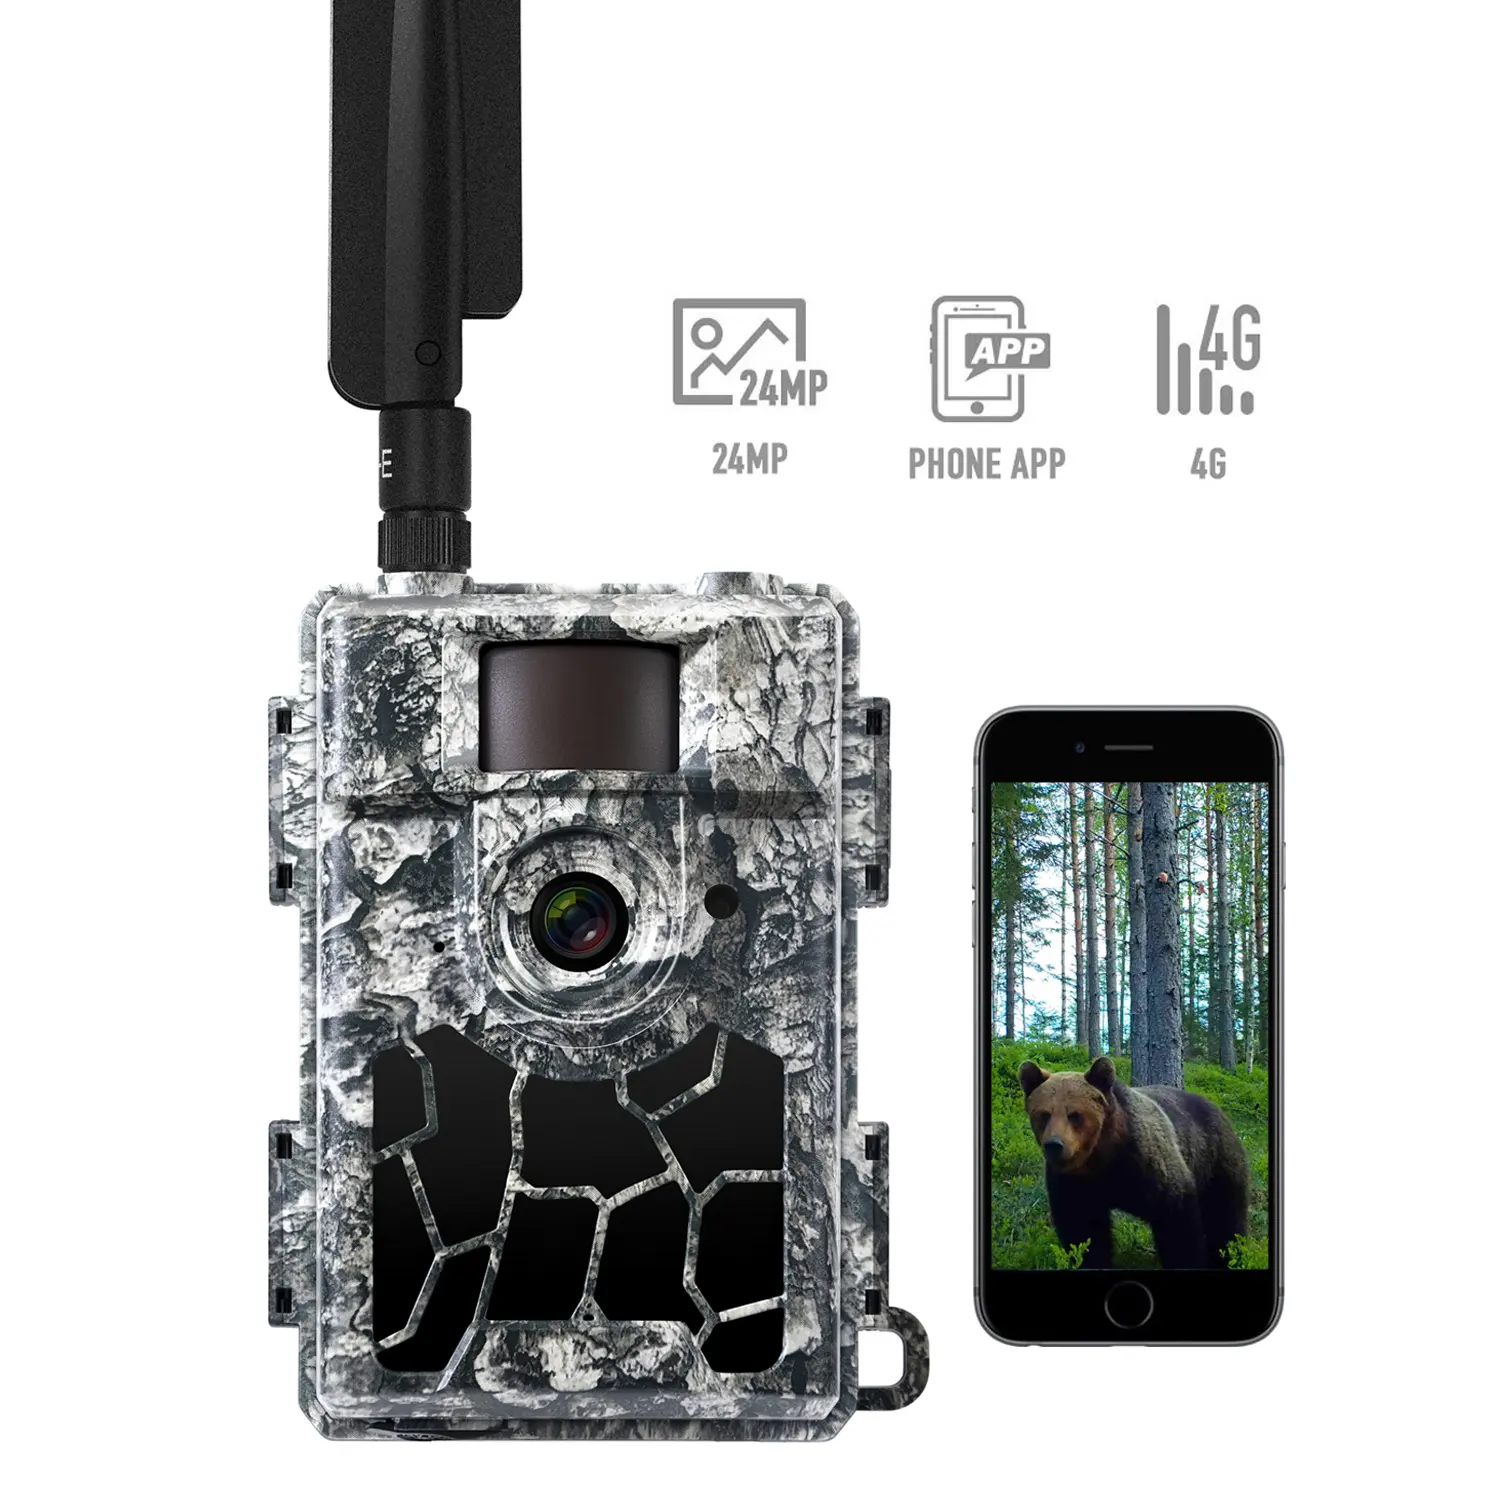 Willfine wireless cellular deer trap game camera de chasse 4g outdoor wildlife Trail Hunting Camera